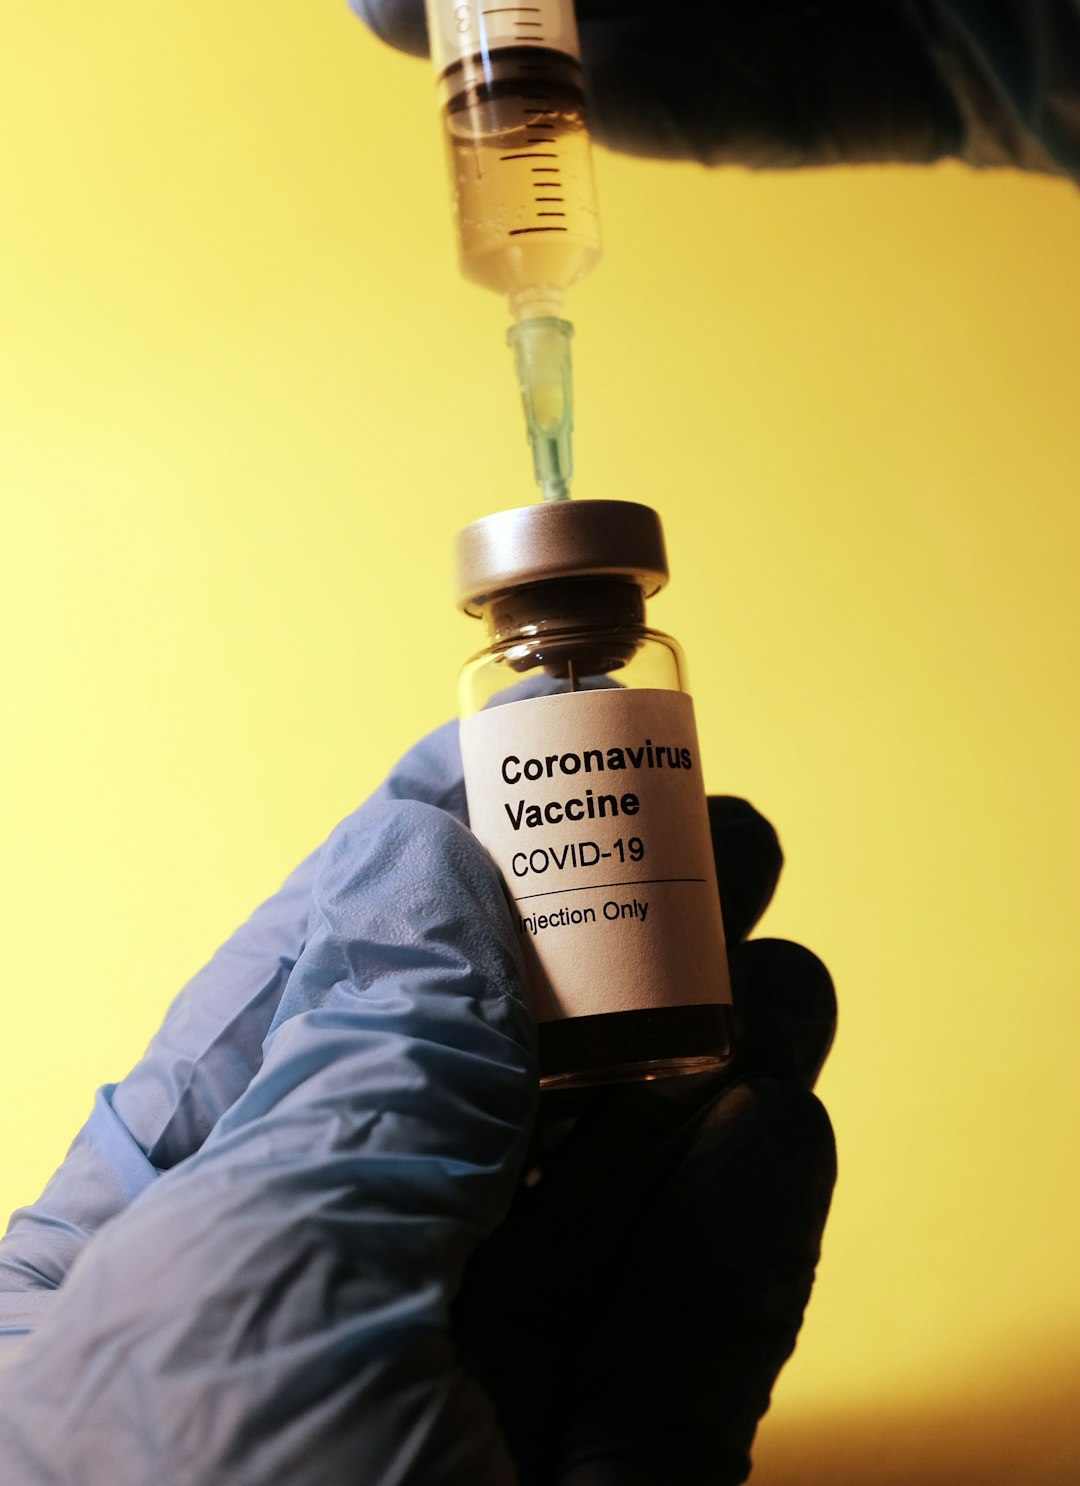 Covid Vaccine Pictures | Download Free Images on Unsplash